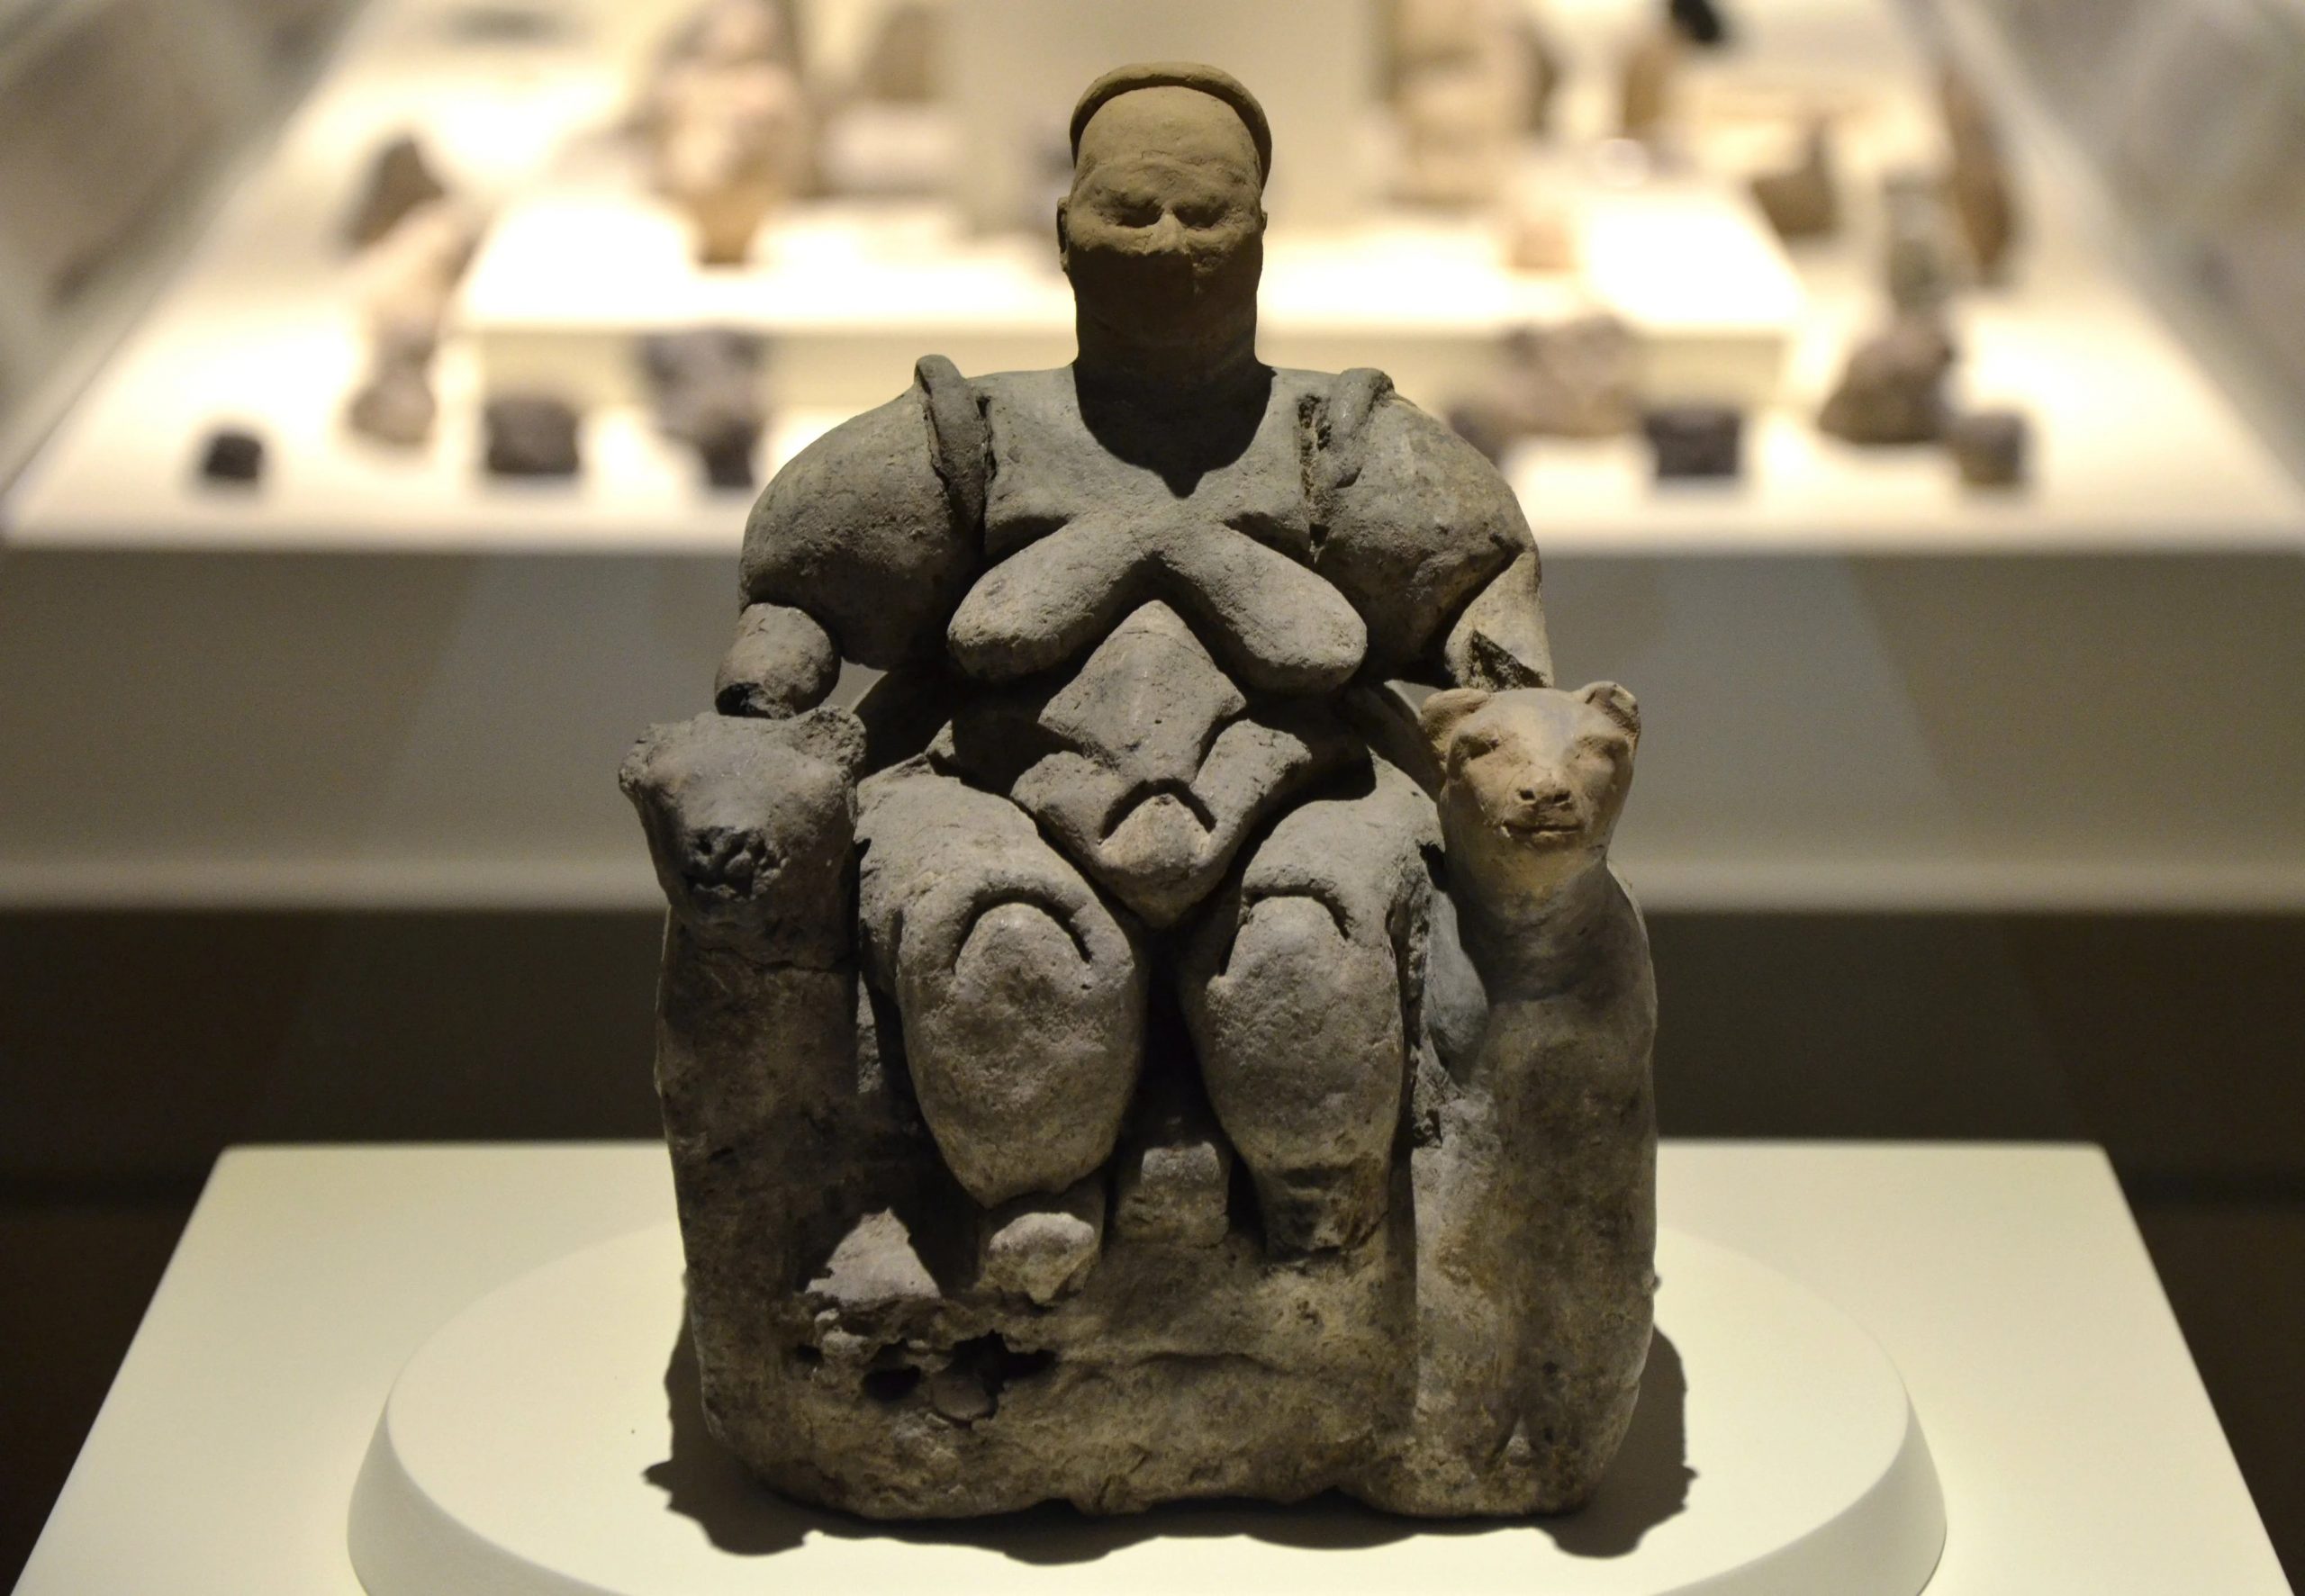 Baked clay figurine depicting mother-goddess